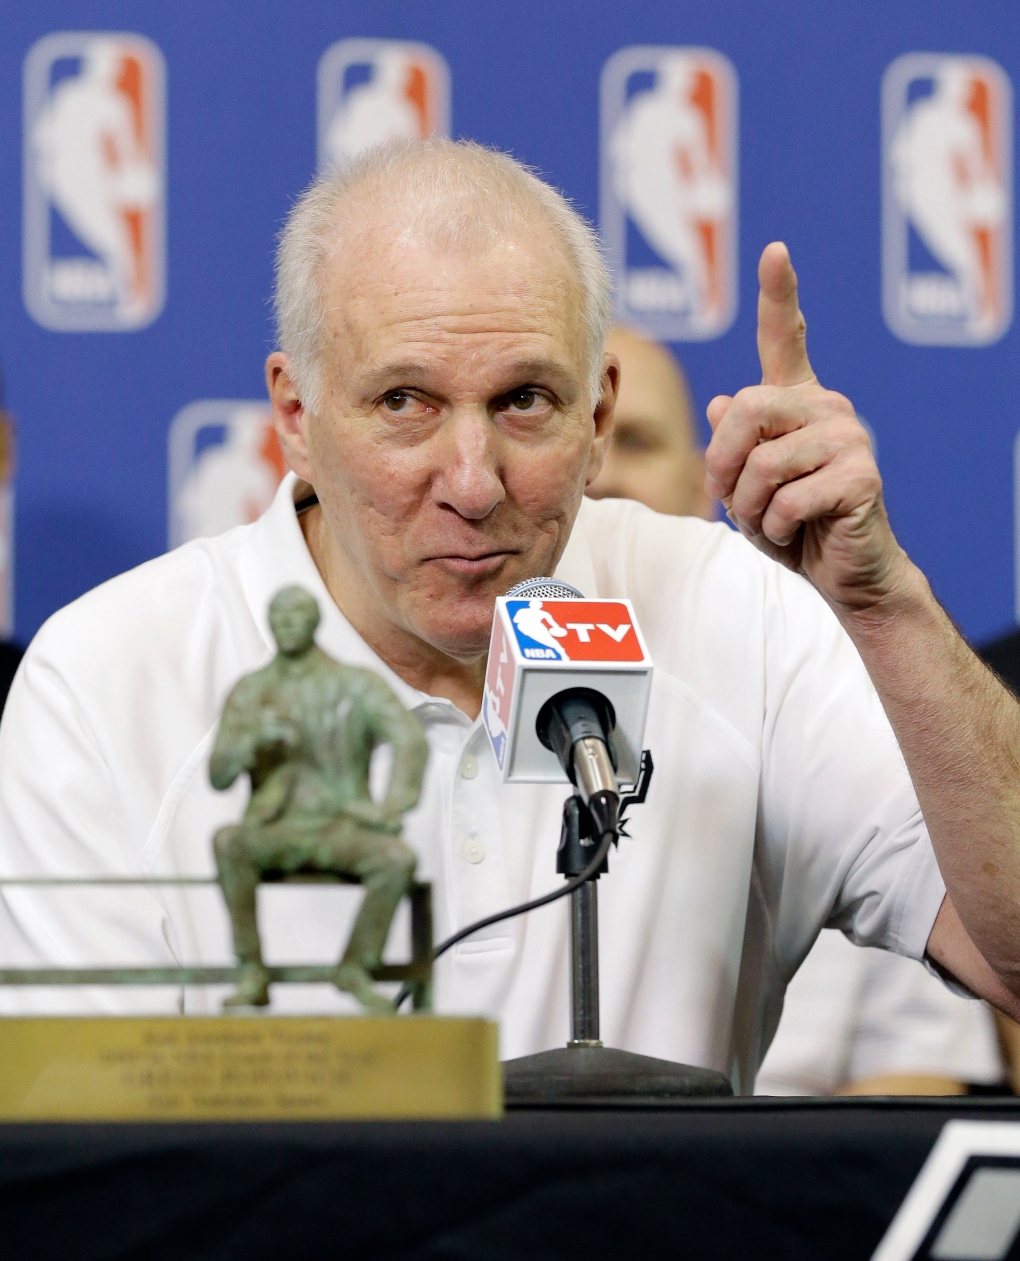 Gregg Popovich named coach of the year